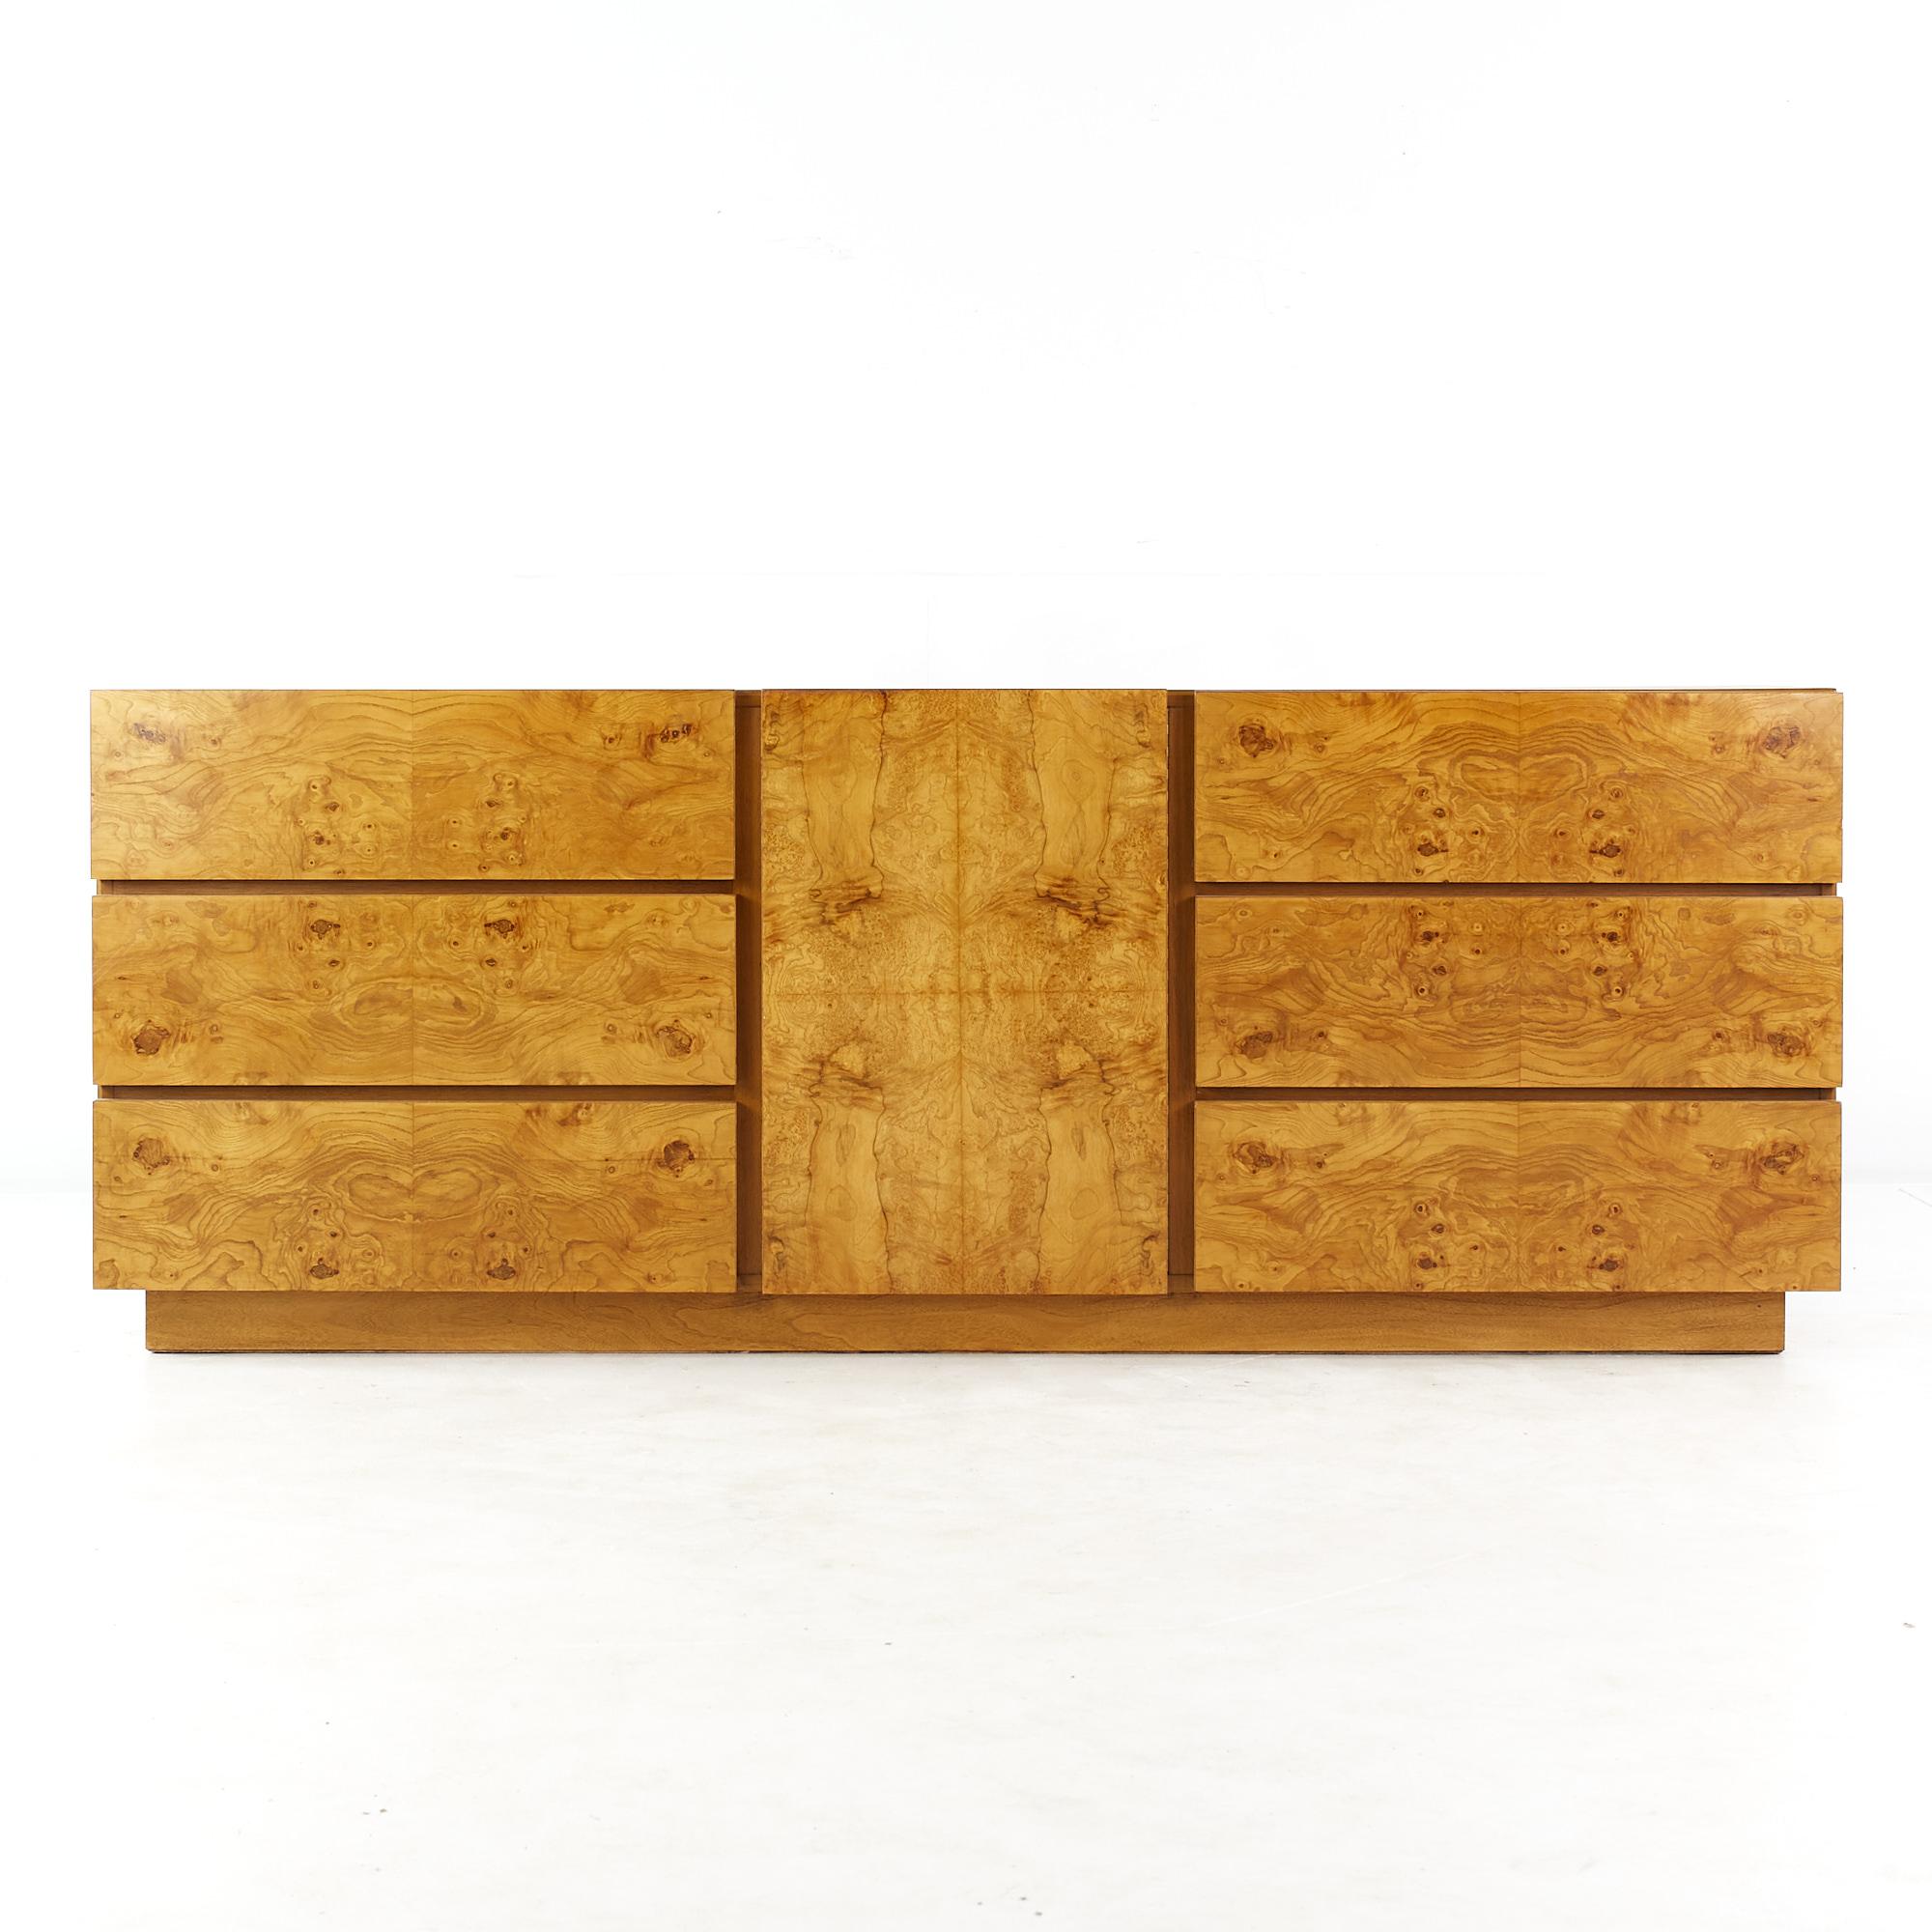 Milo Baughman style lane mid century burlwood lowboy dresser

This dresser measures: 78 wide x 18 deep x 30 inches high

All pieces of furniture can be had in what we call restored vintage condition. That means the piece is restored upon